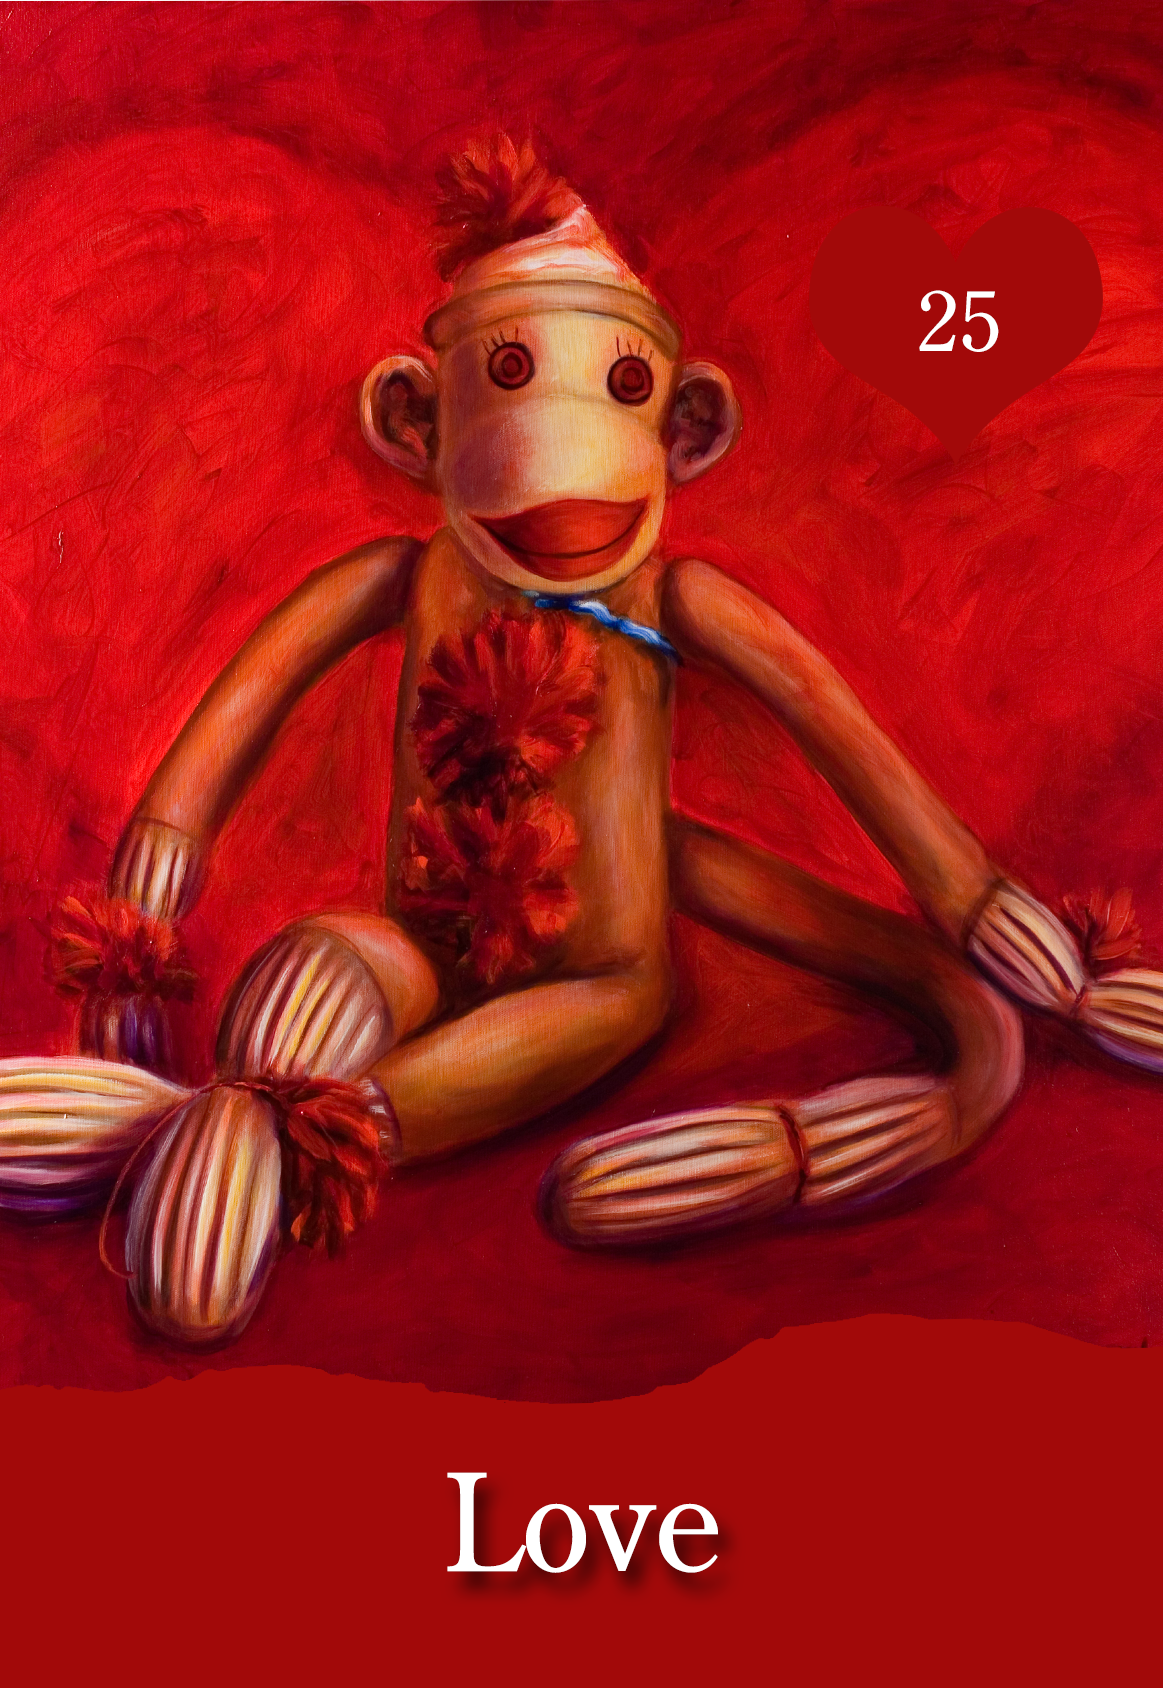 Love Sock Monkey surrounded be a red heart